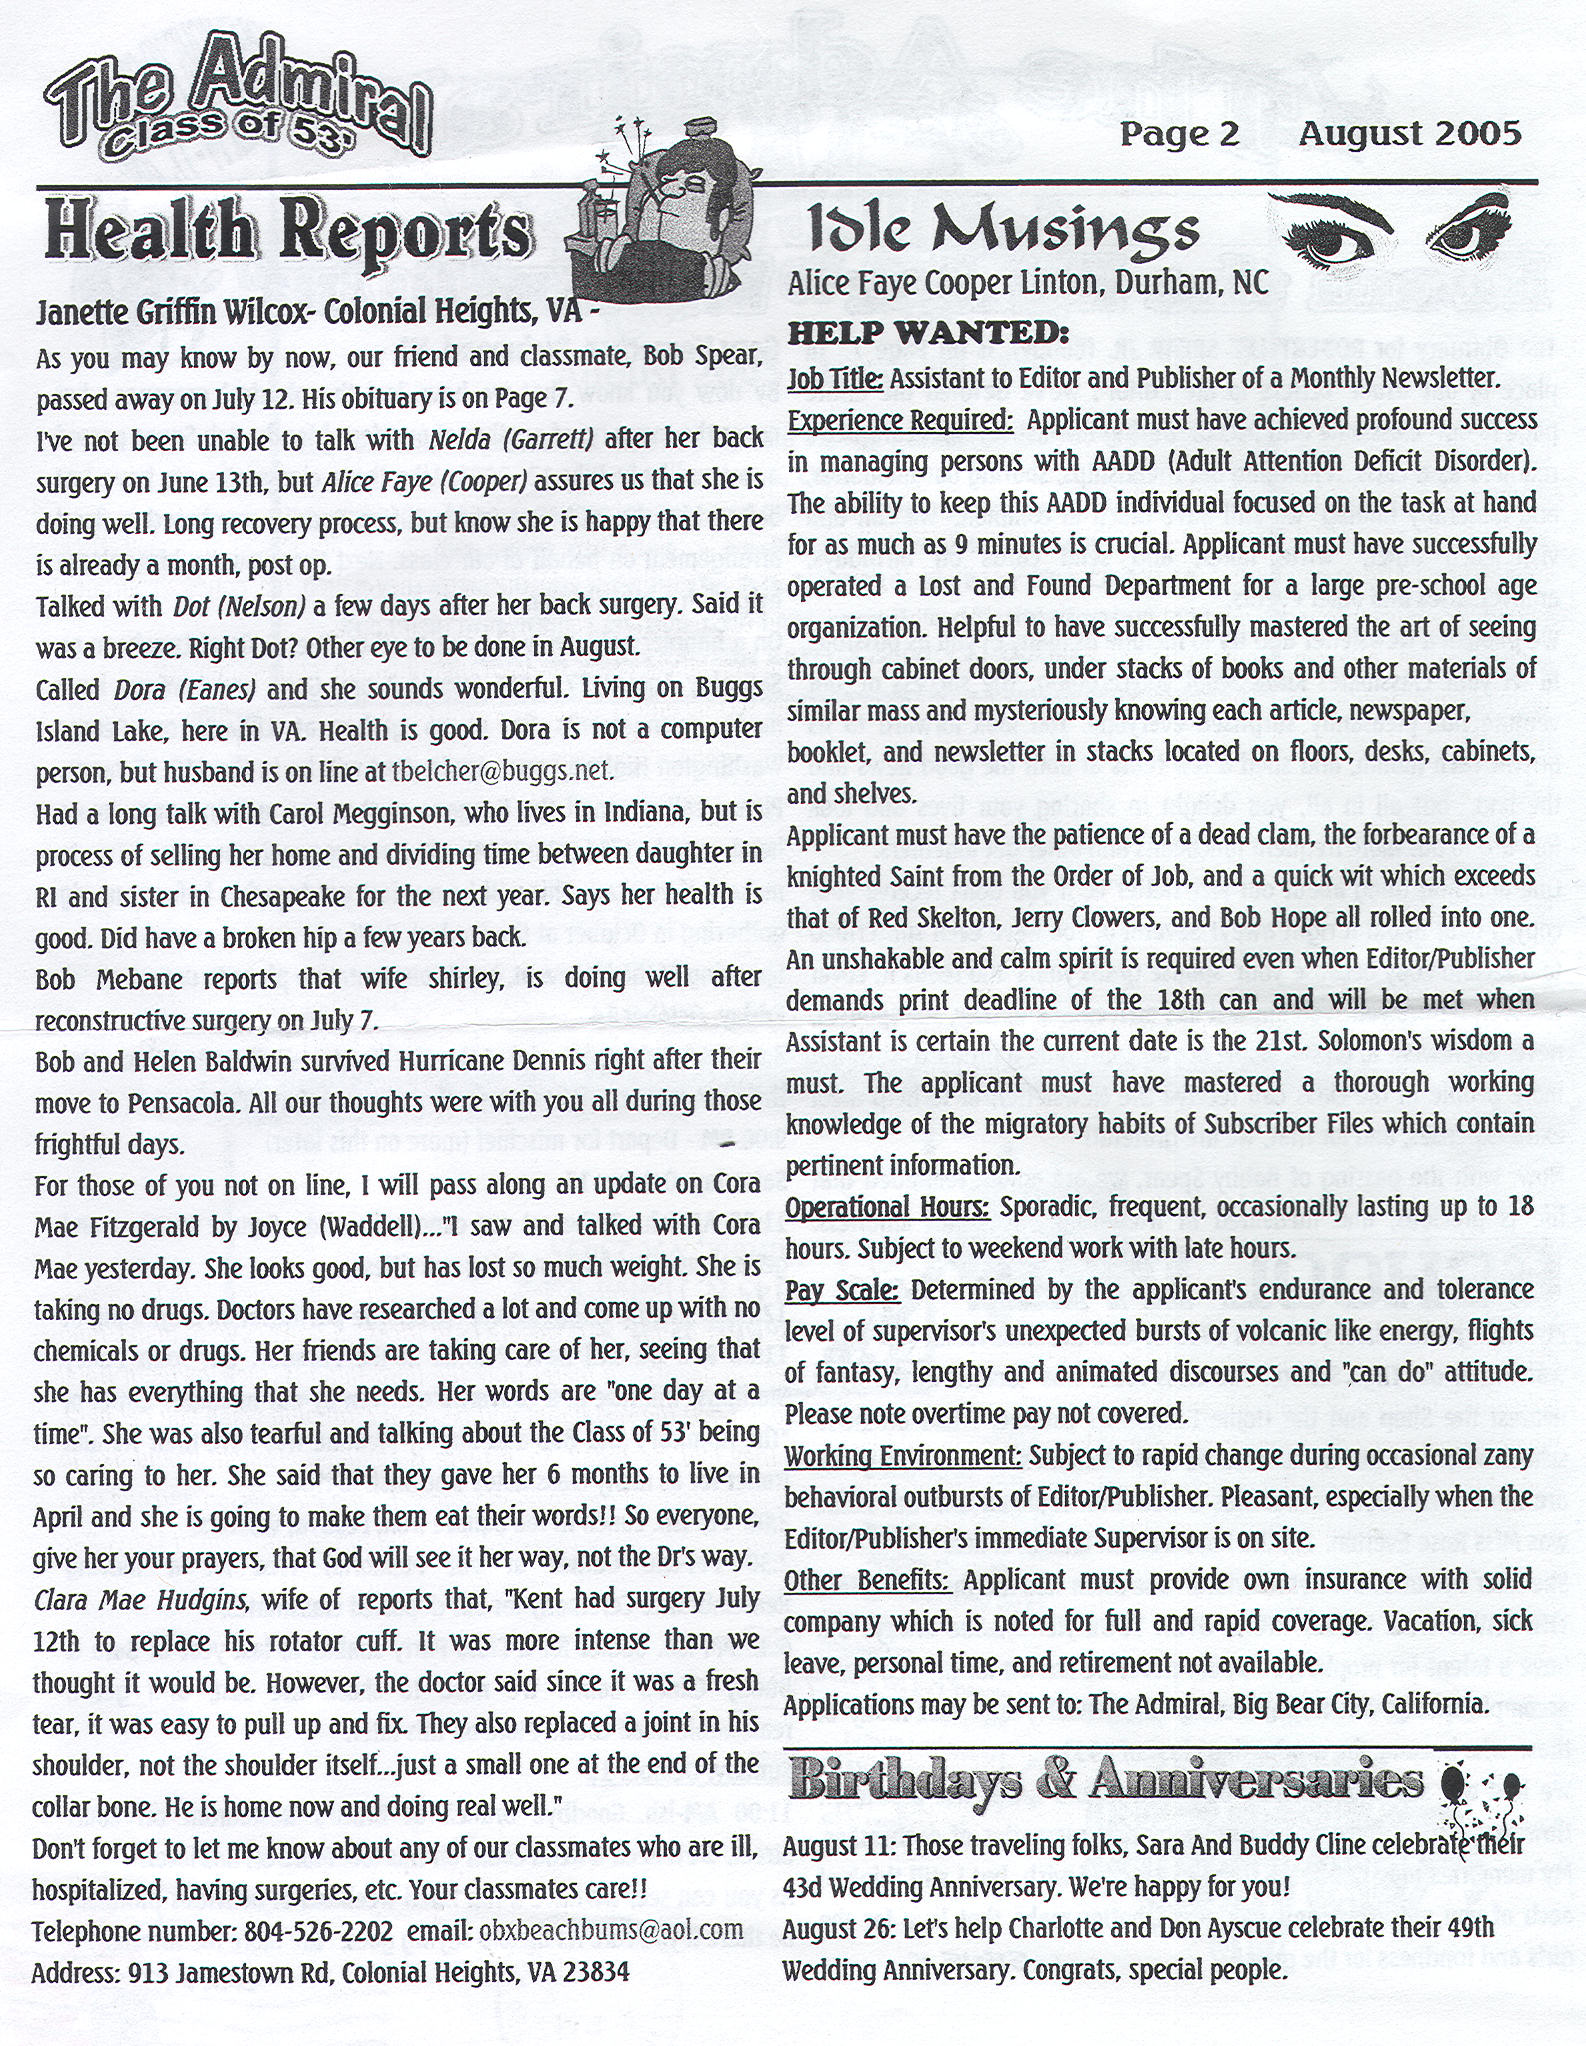 The Admiral - August 2005 - pg. 2